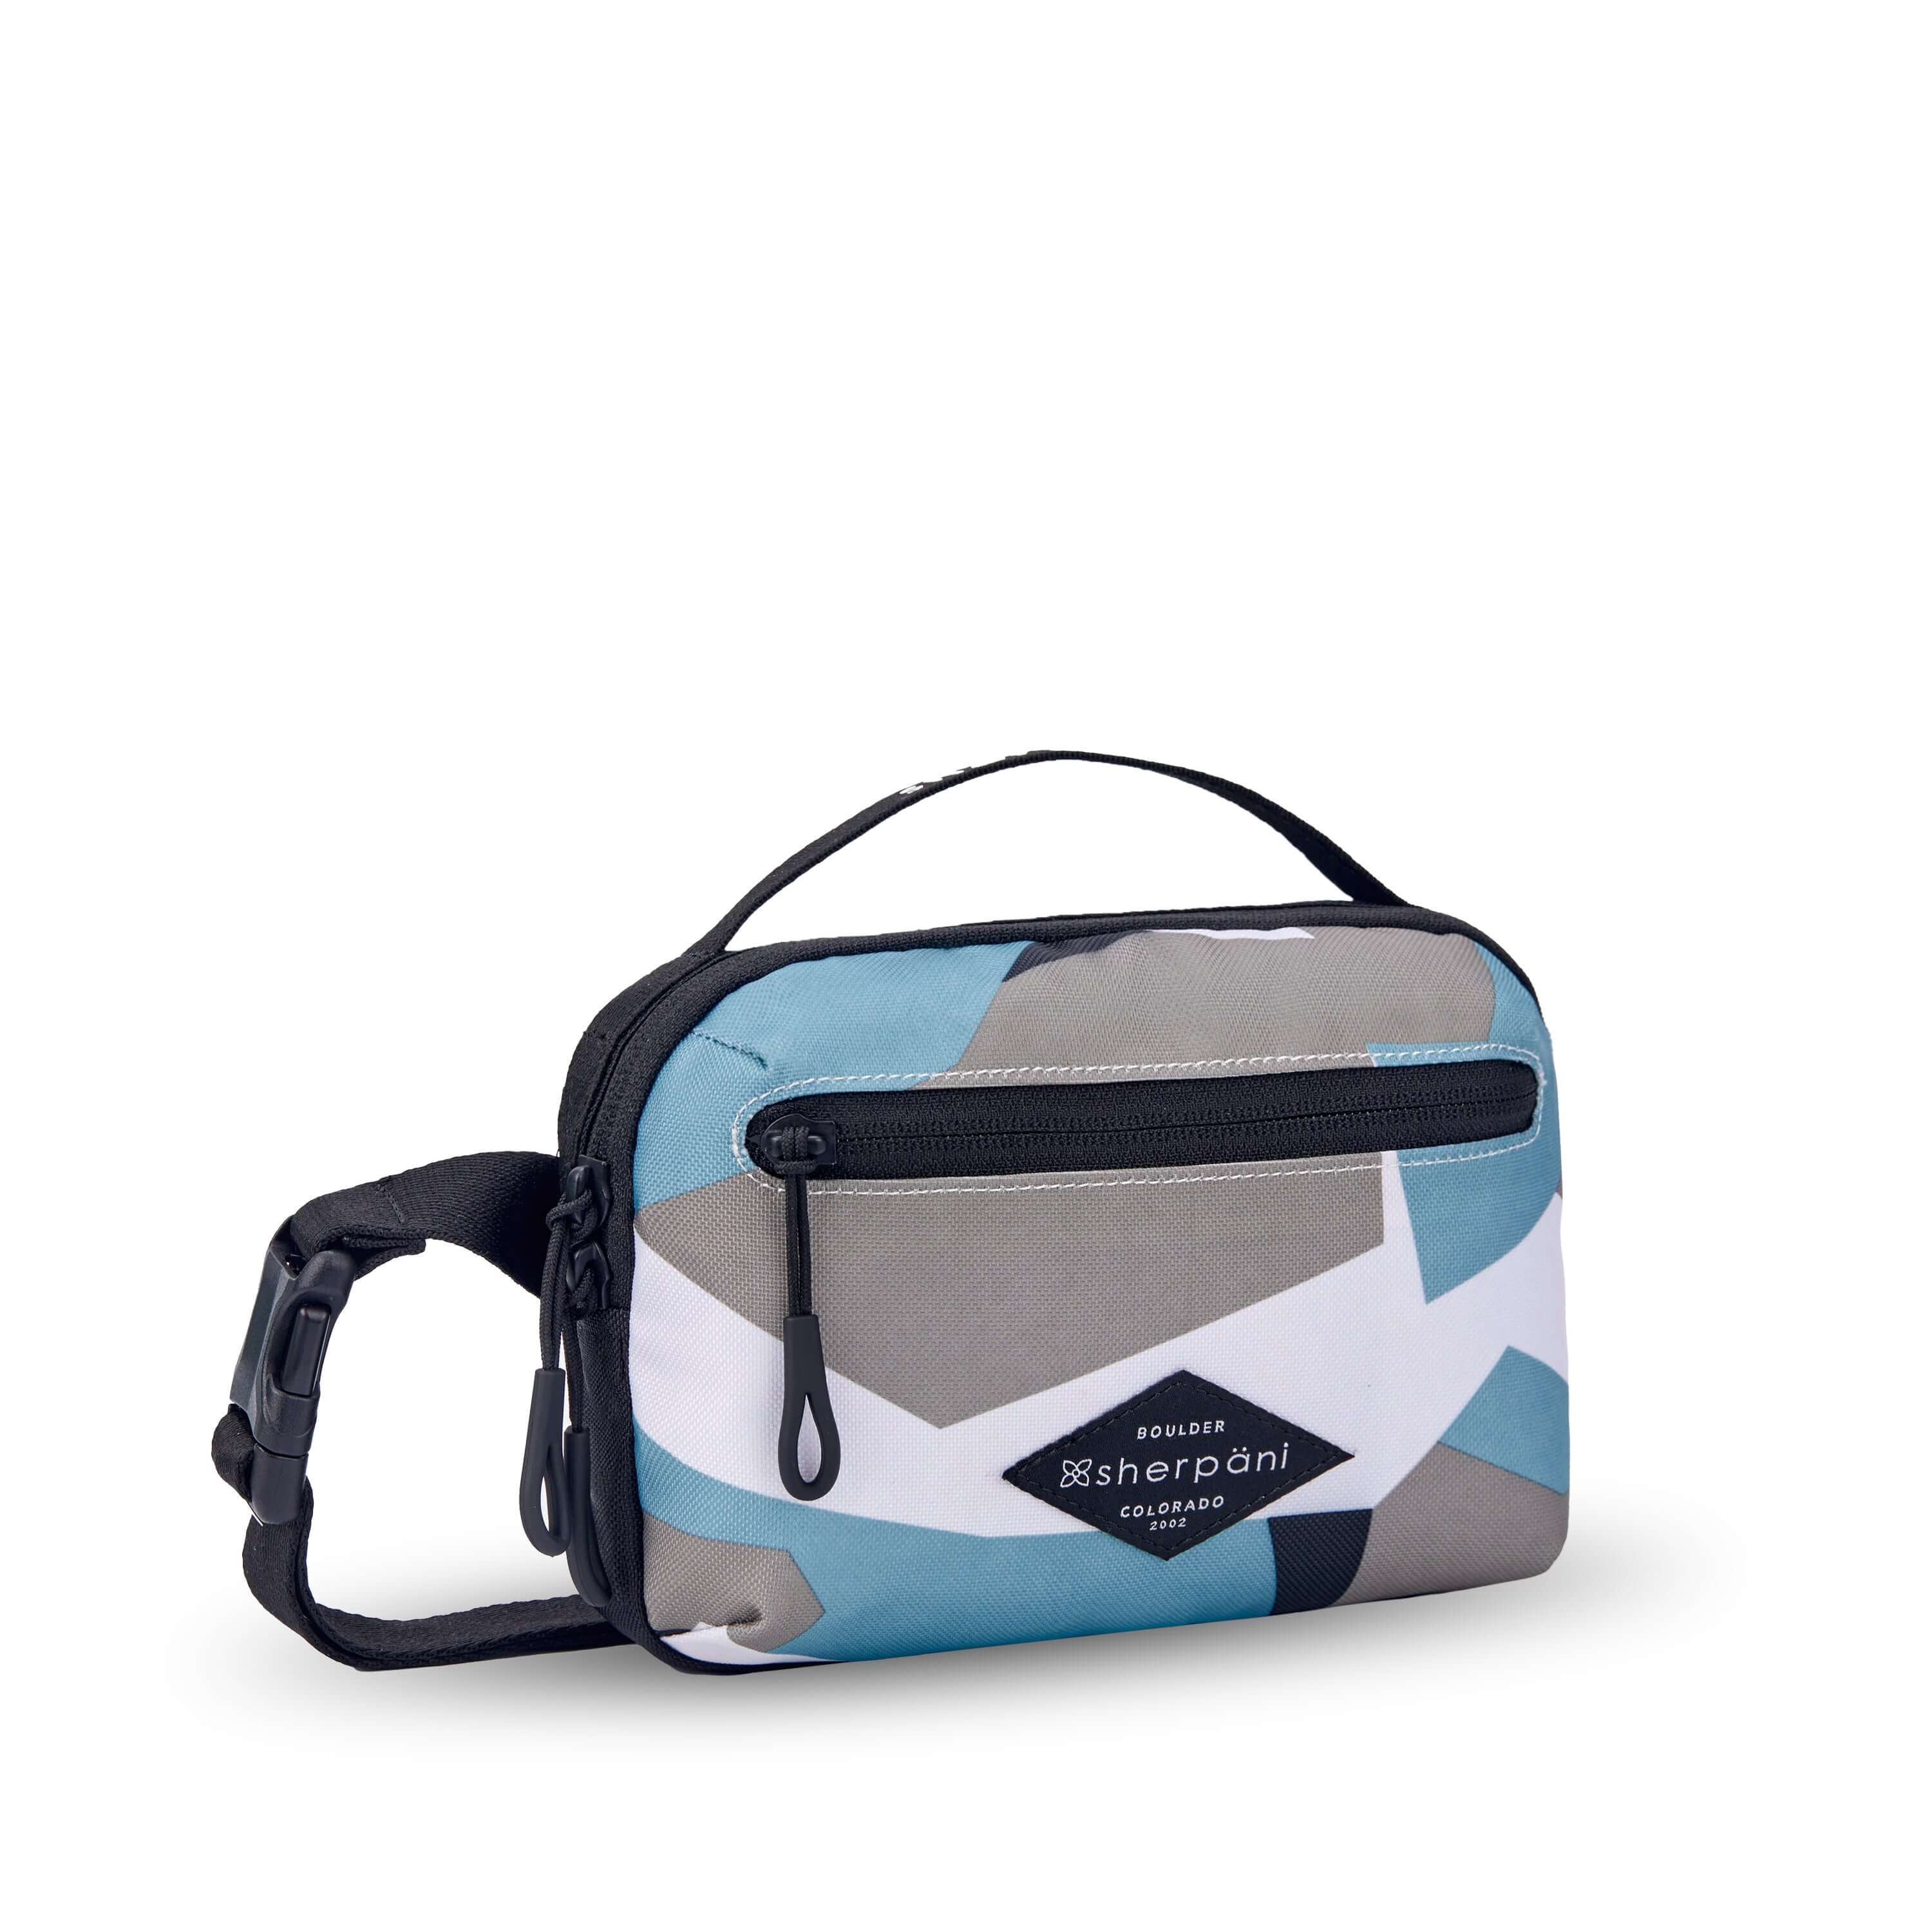 Angled front view of Sherpani’s fanny pack, the Hyk in Summe Camo. The bag is two toned, the front half is a camouflage pattern of light blue, white and gray, and the back half is black. There is an external zipper pocket on the front of the bag. Easy pull zippers are accented in black. The fanny pack features an adjustable strap with a buckle. #color_summer camo